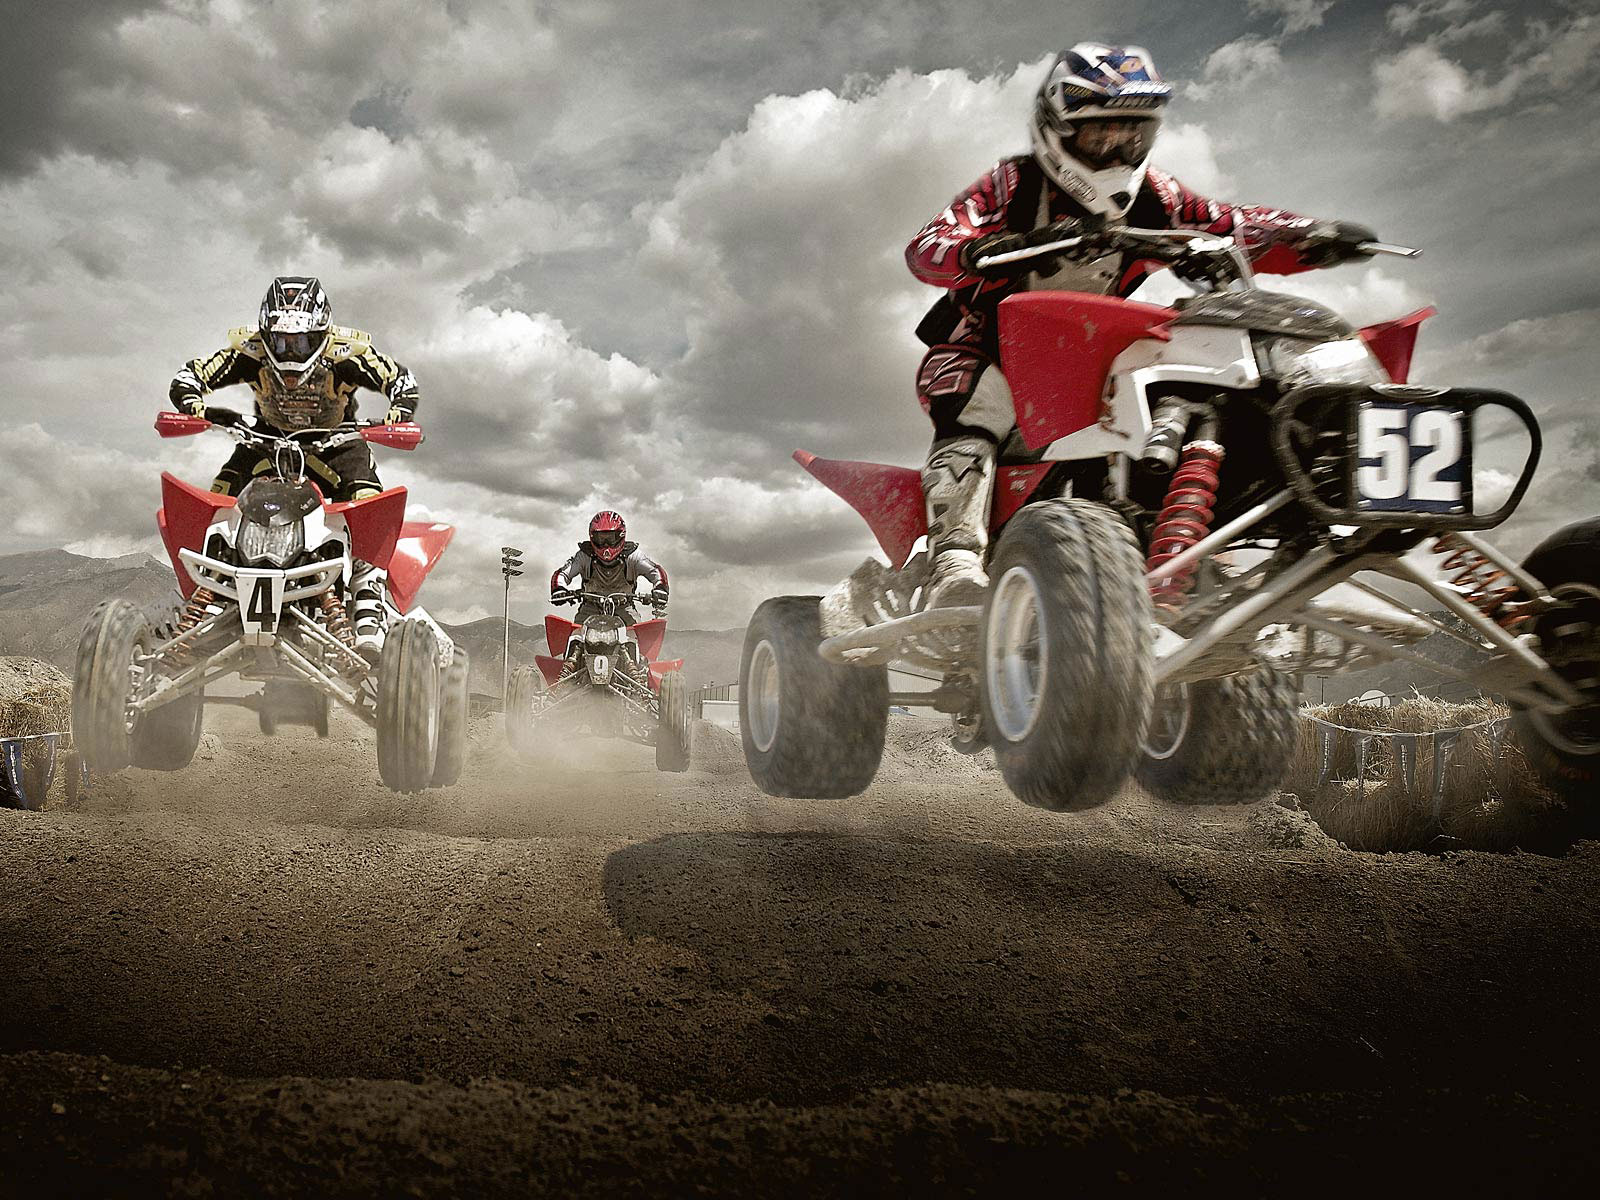 Quad Bike Wallpapers High Quality | Download Free